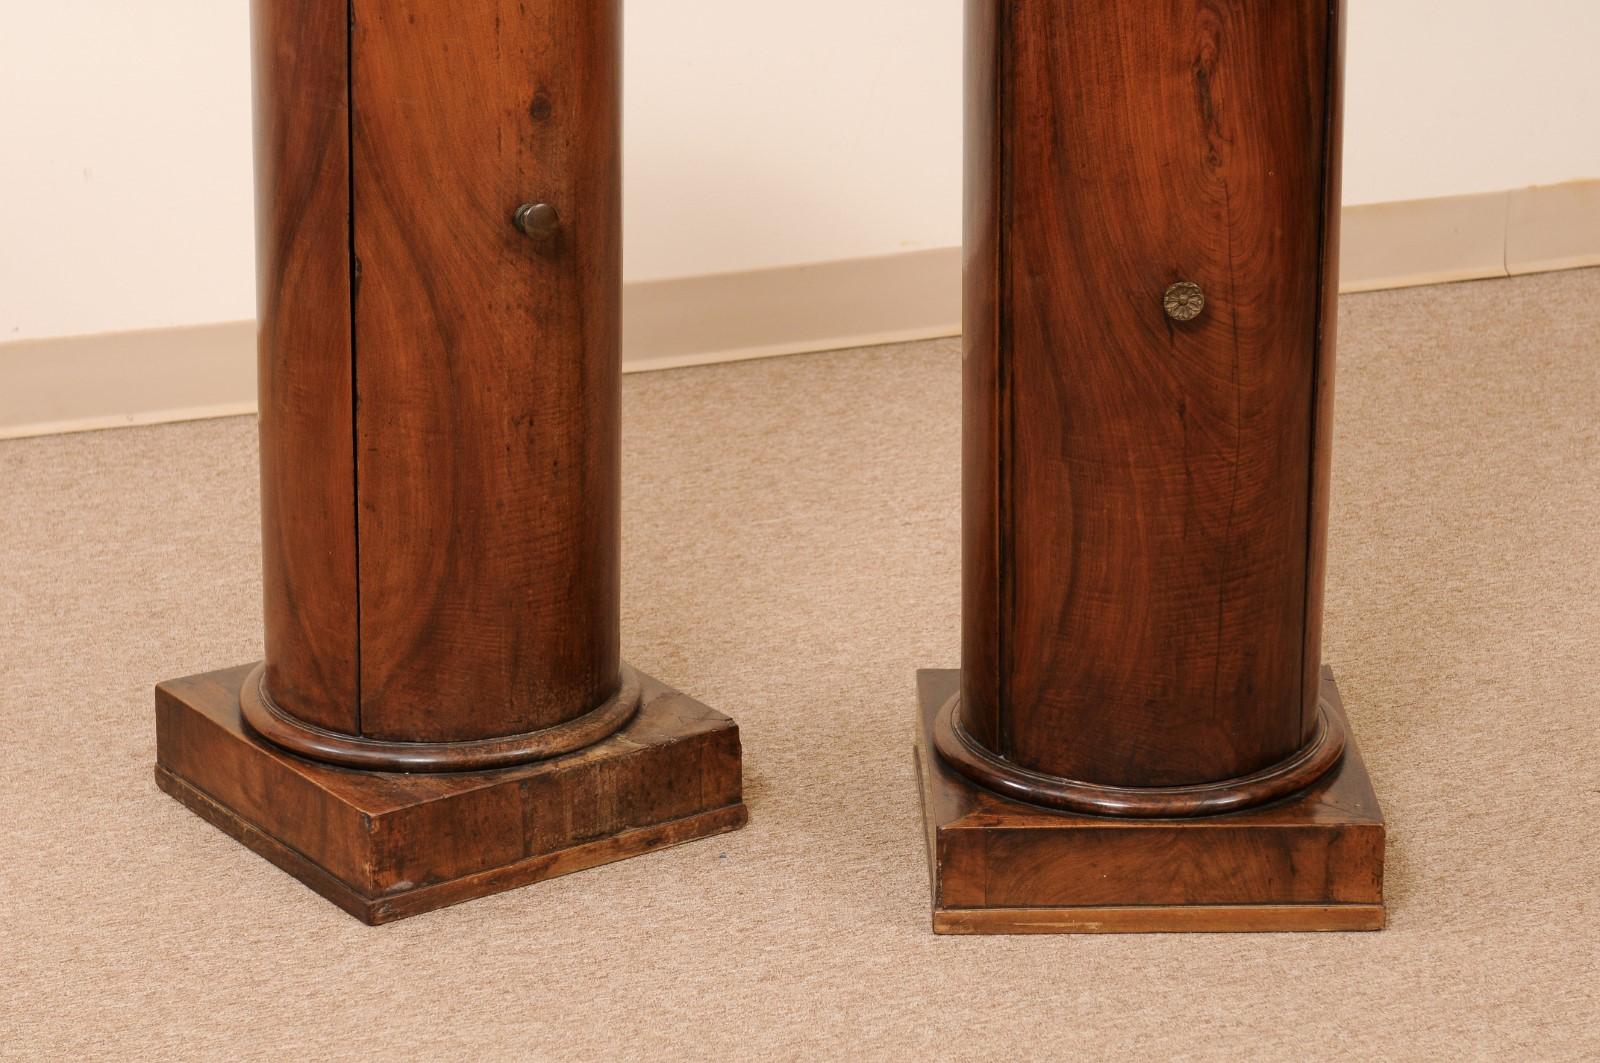 Pair of Early 19th Century Italian Neoclassical Walnut Pedestal Cabinets For Sale 3